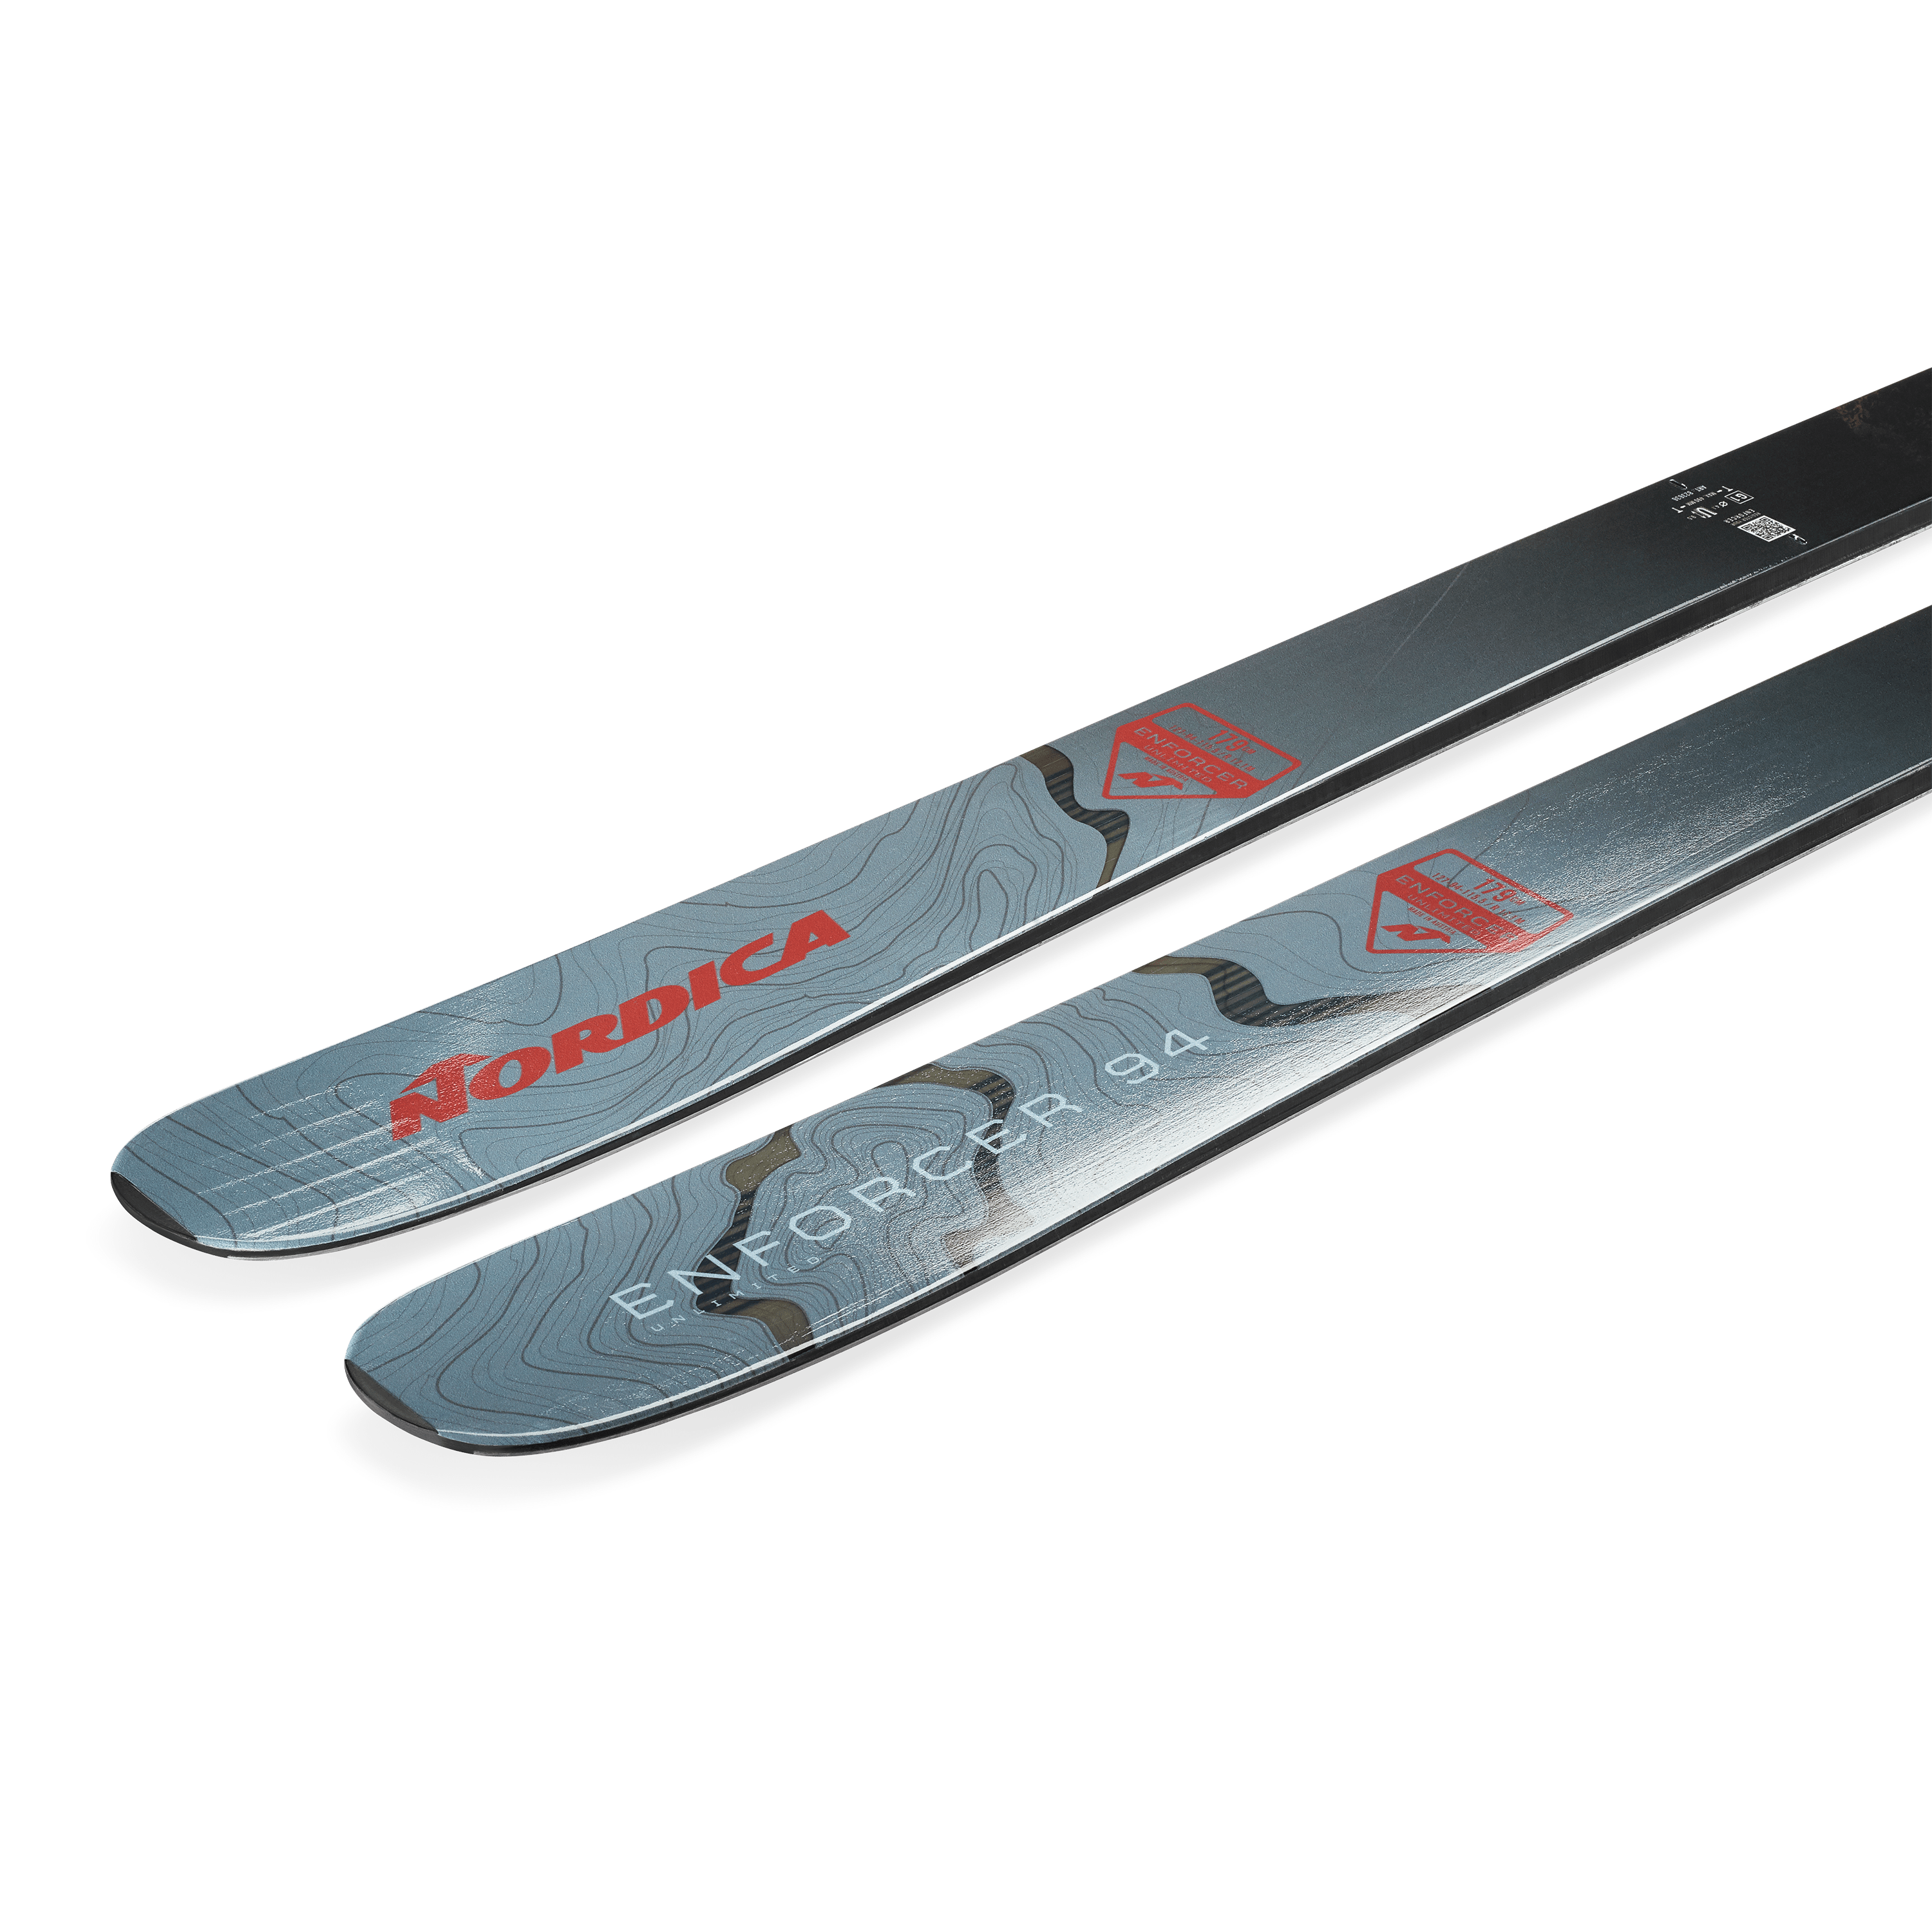 Picture of the Nordica Enforcer 94 unlimited skis.